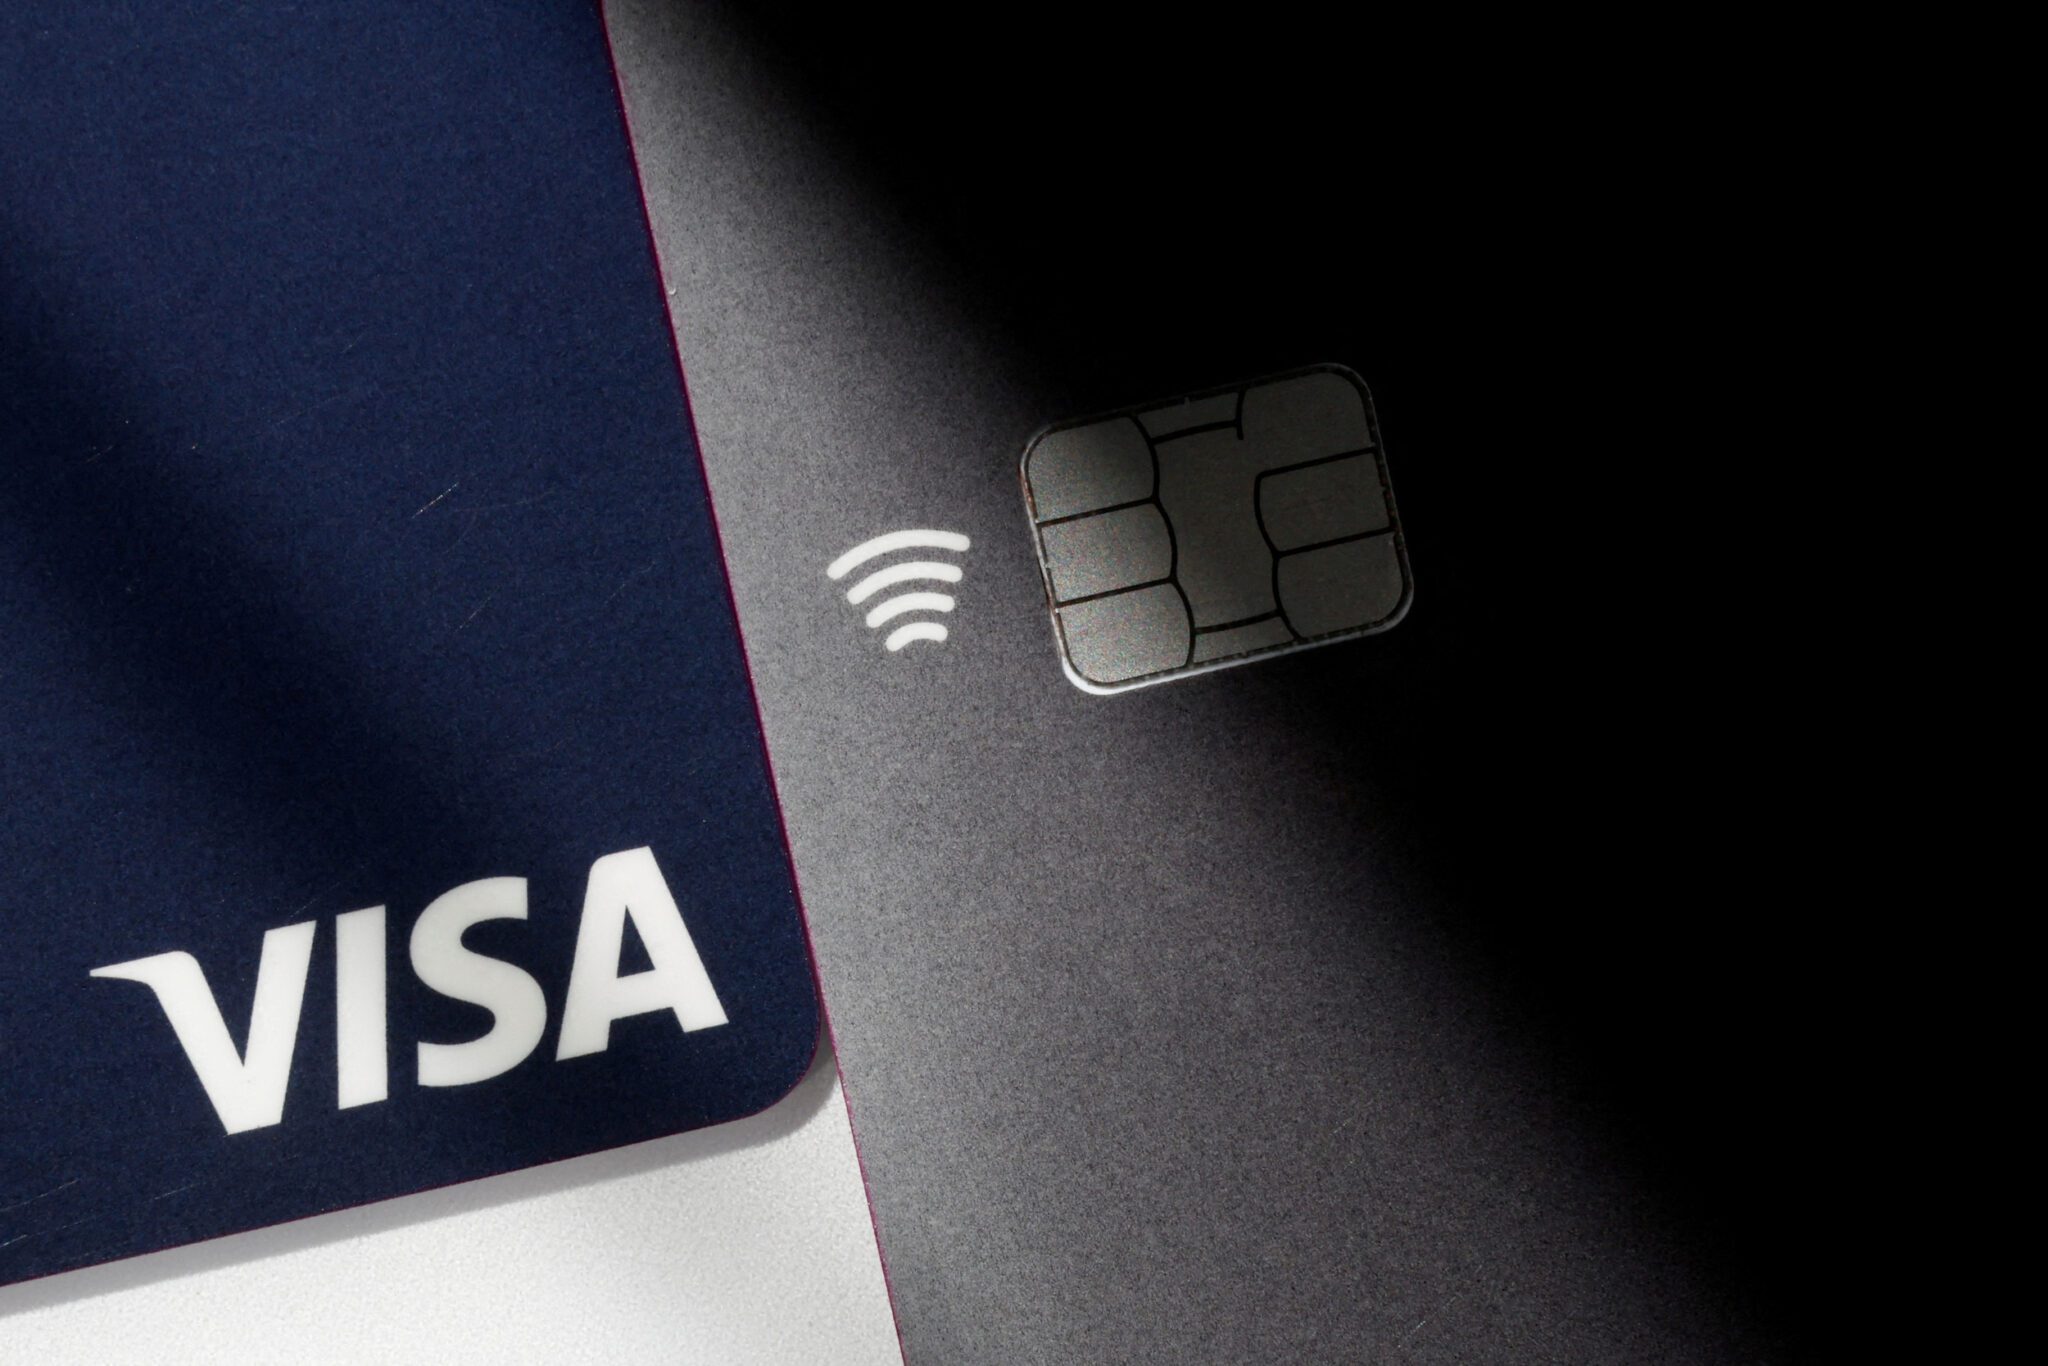 Visa recorded higher than expected fourth quarter profits thanks to booming travel demand.